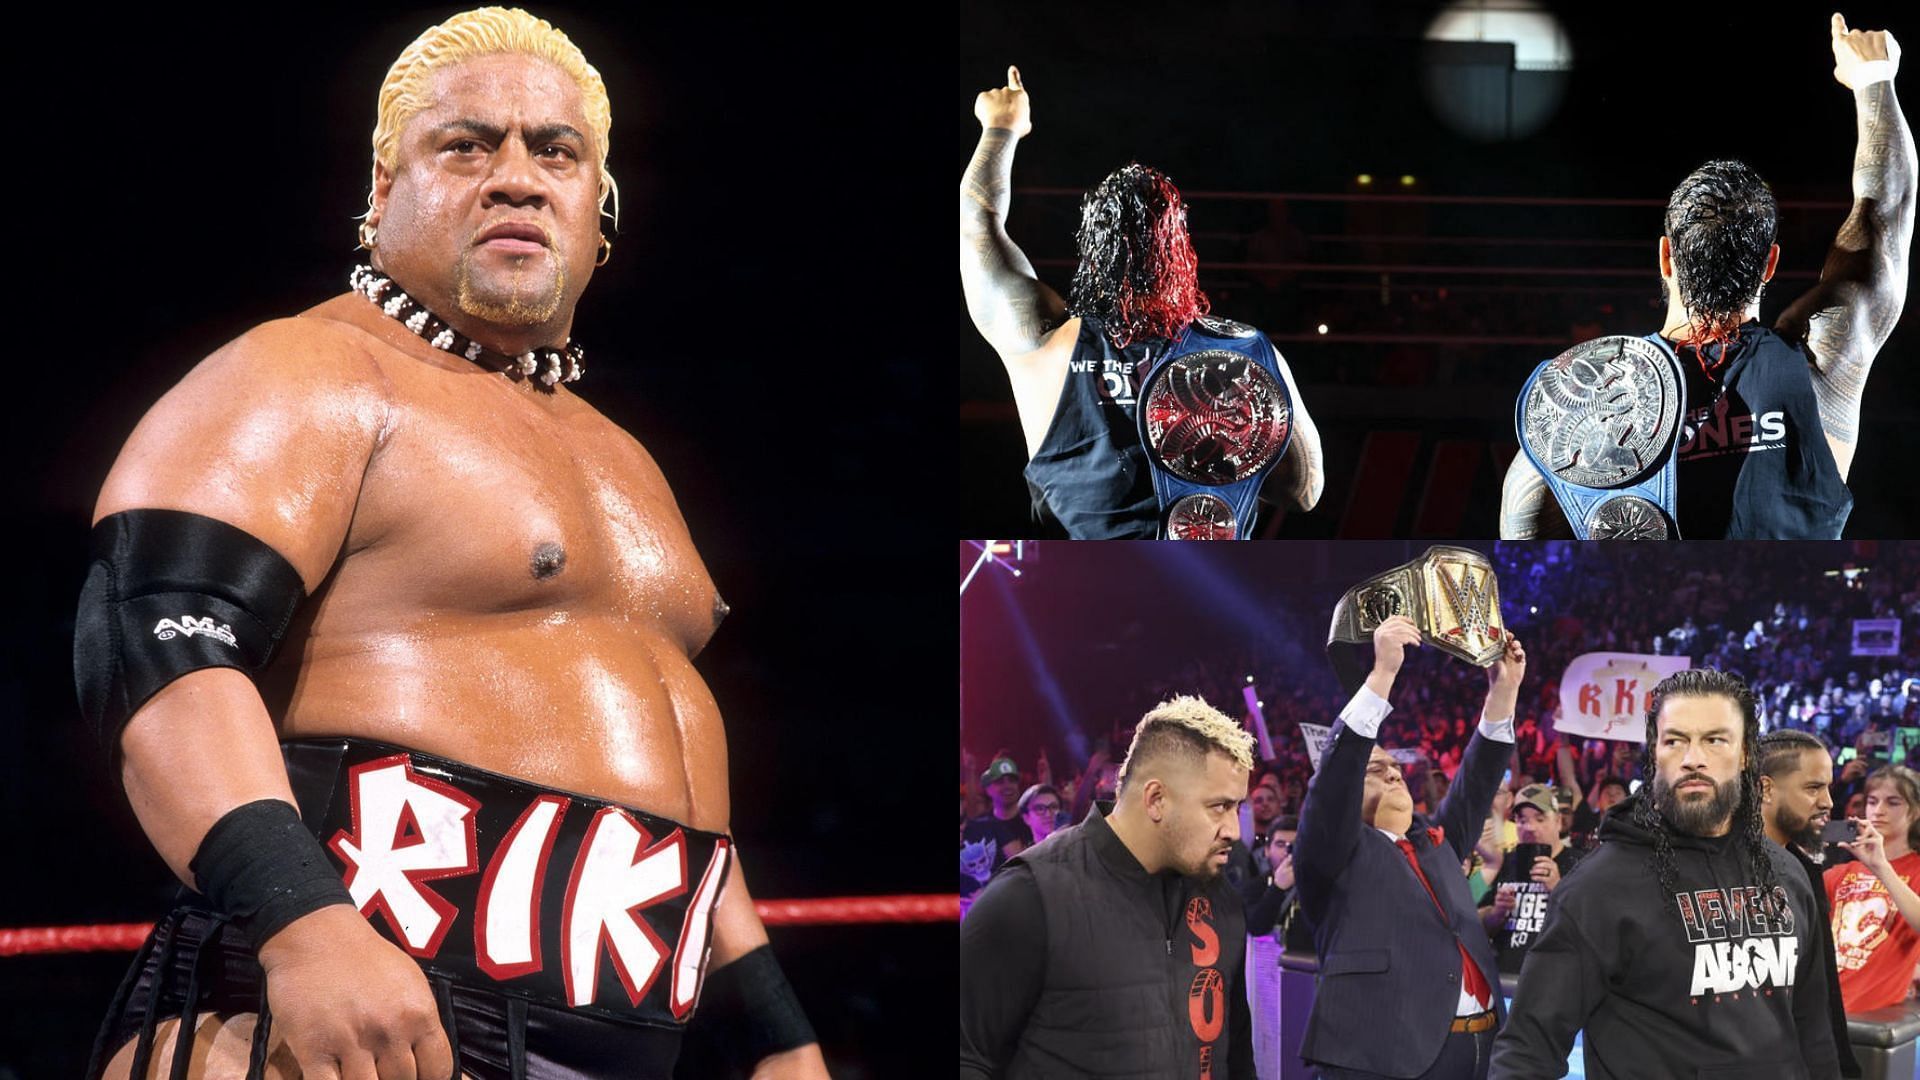 Solo Sikoa, Jimmy, and Jey Uso are sons of Rikishi